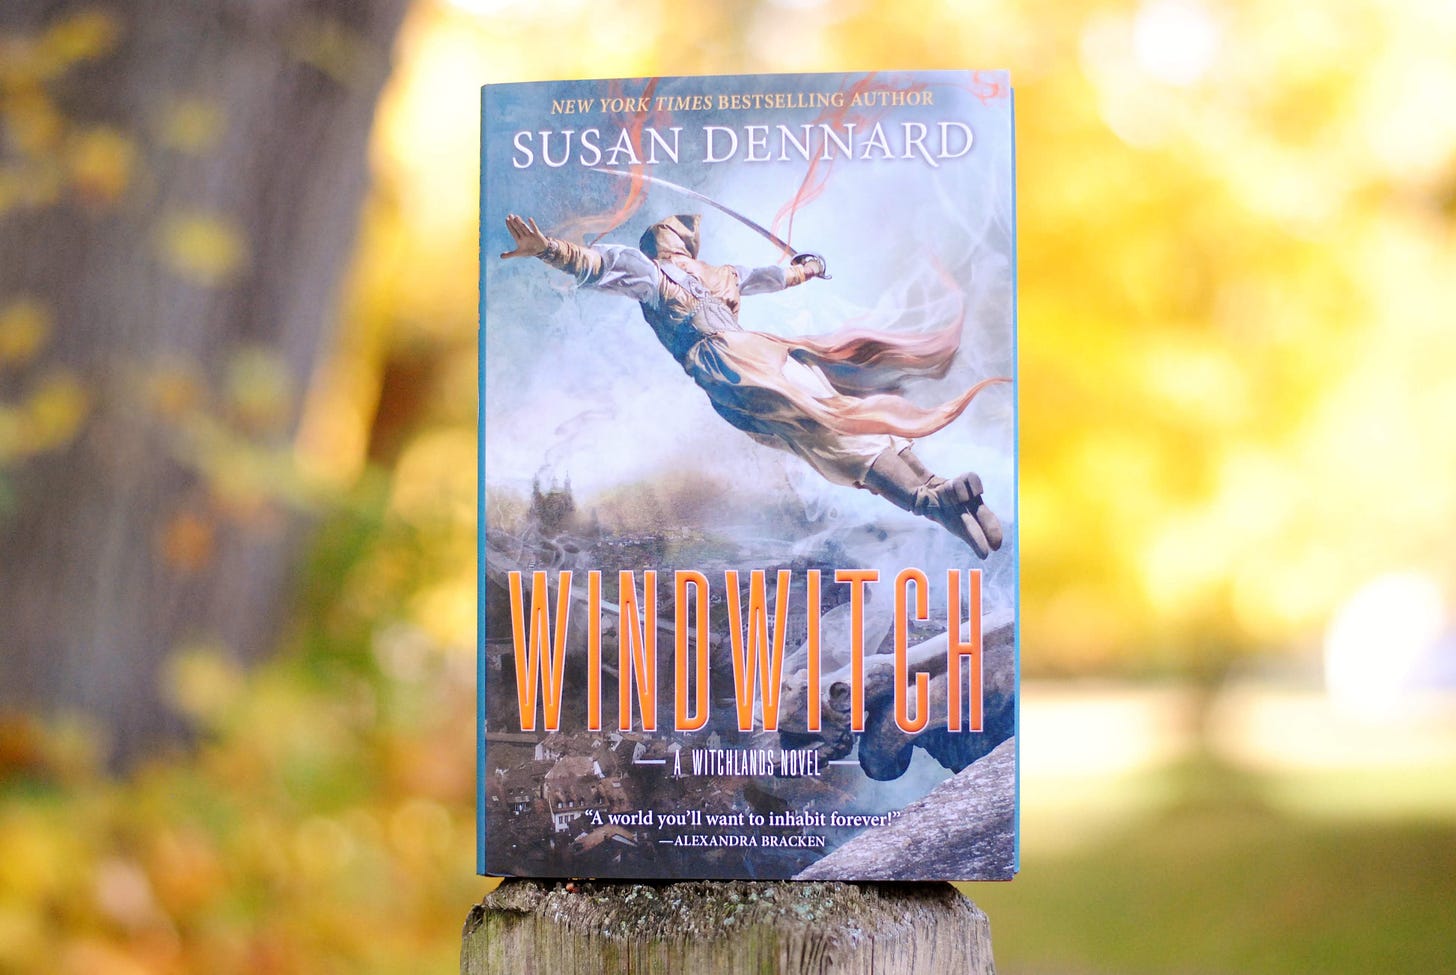 A picture of Windwitch against fall foliage